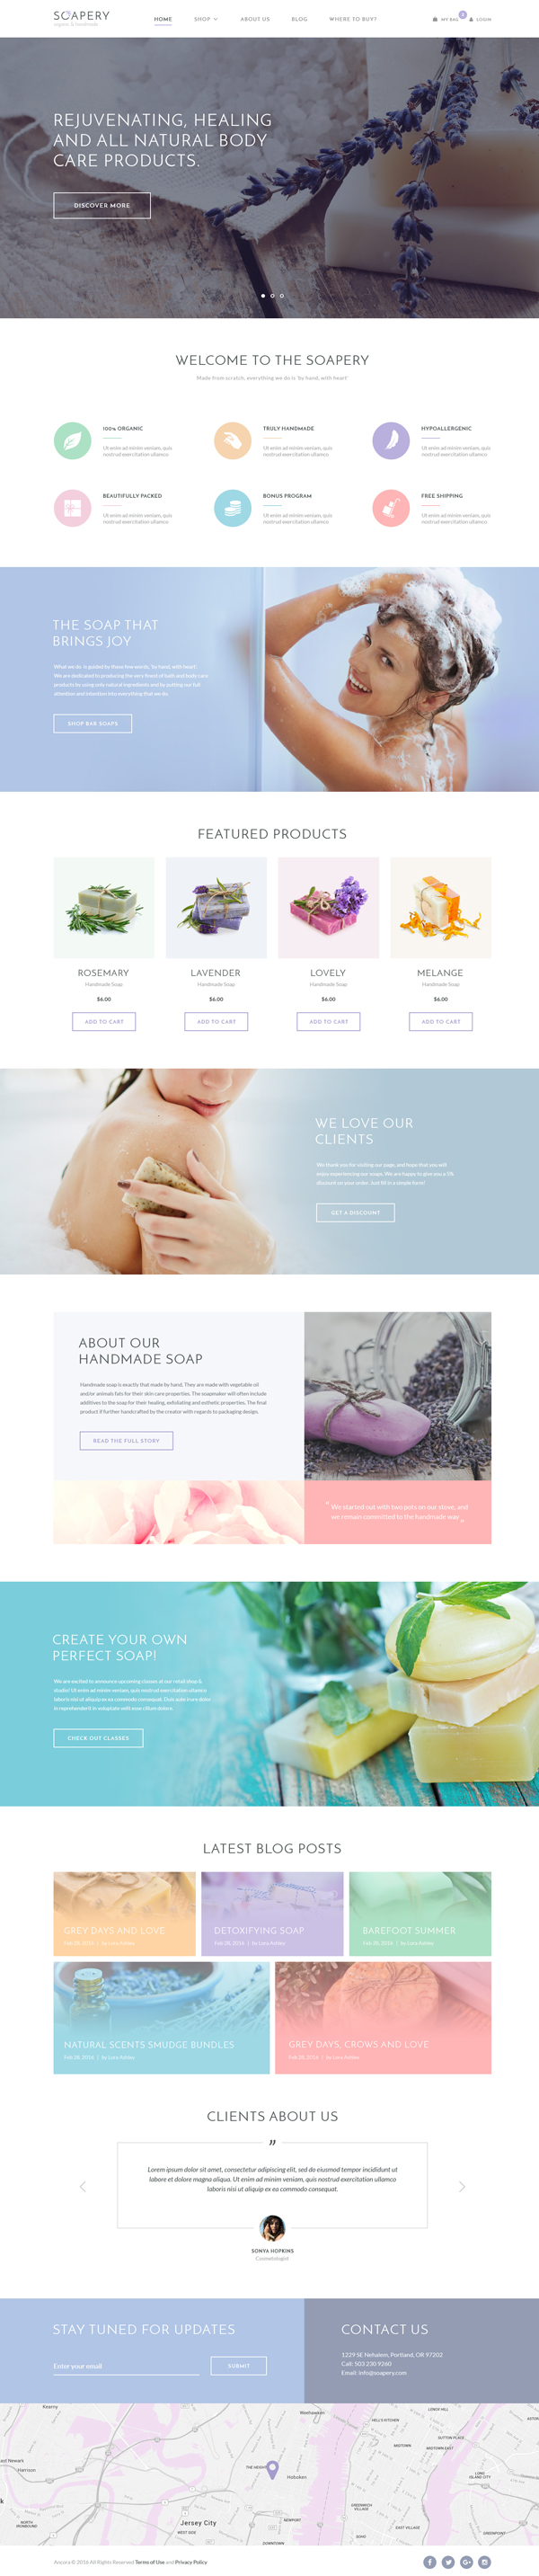 Soapery – Handmade Soap & Handcrafted Products Shop WP Theme